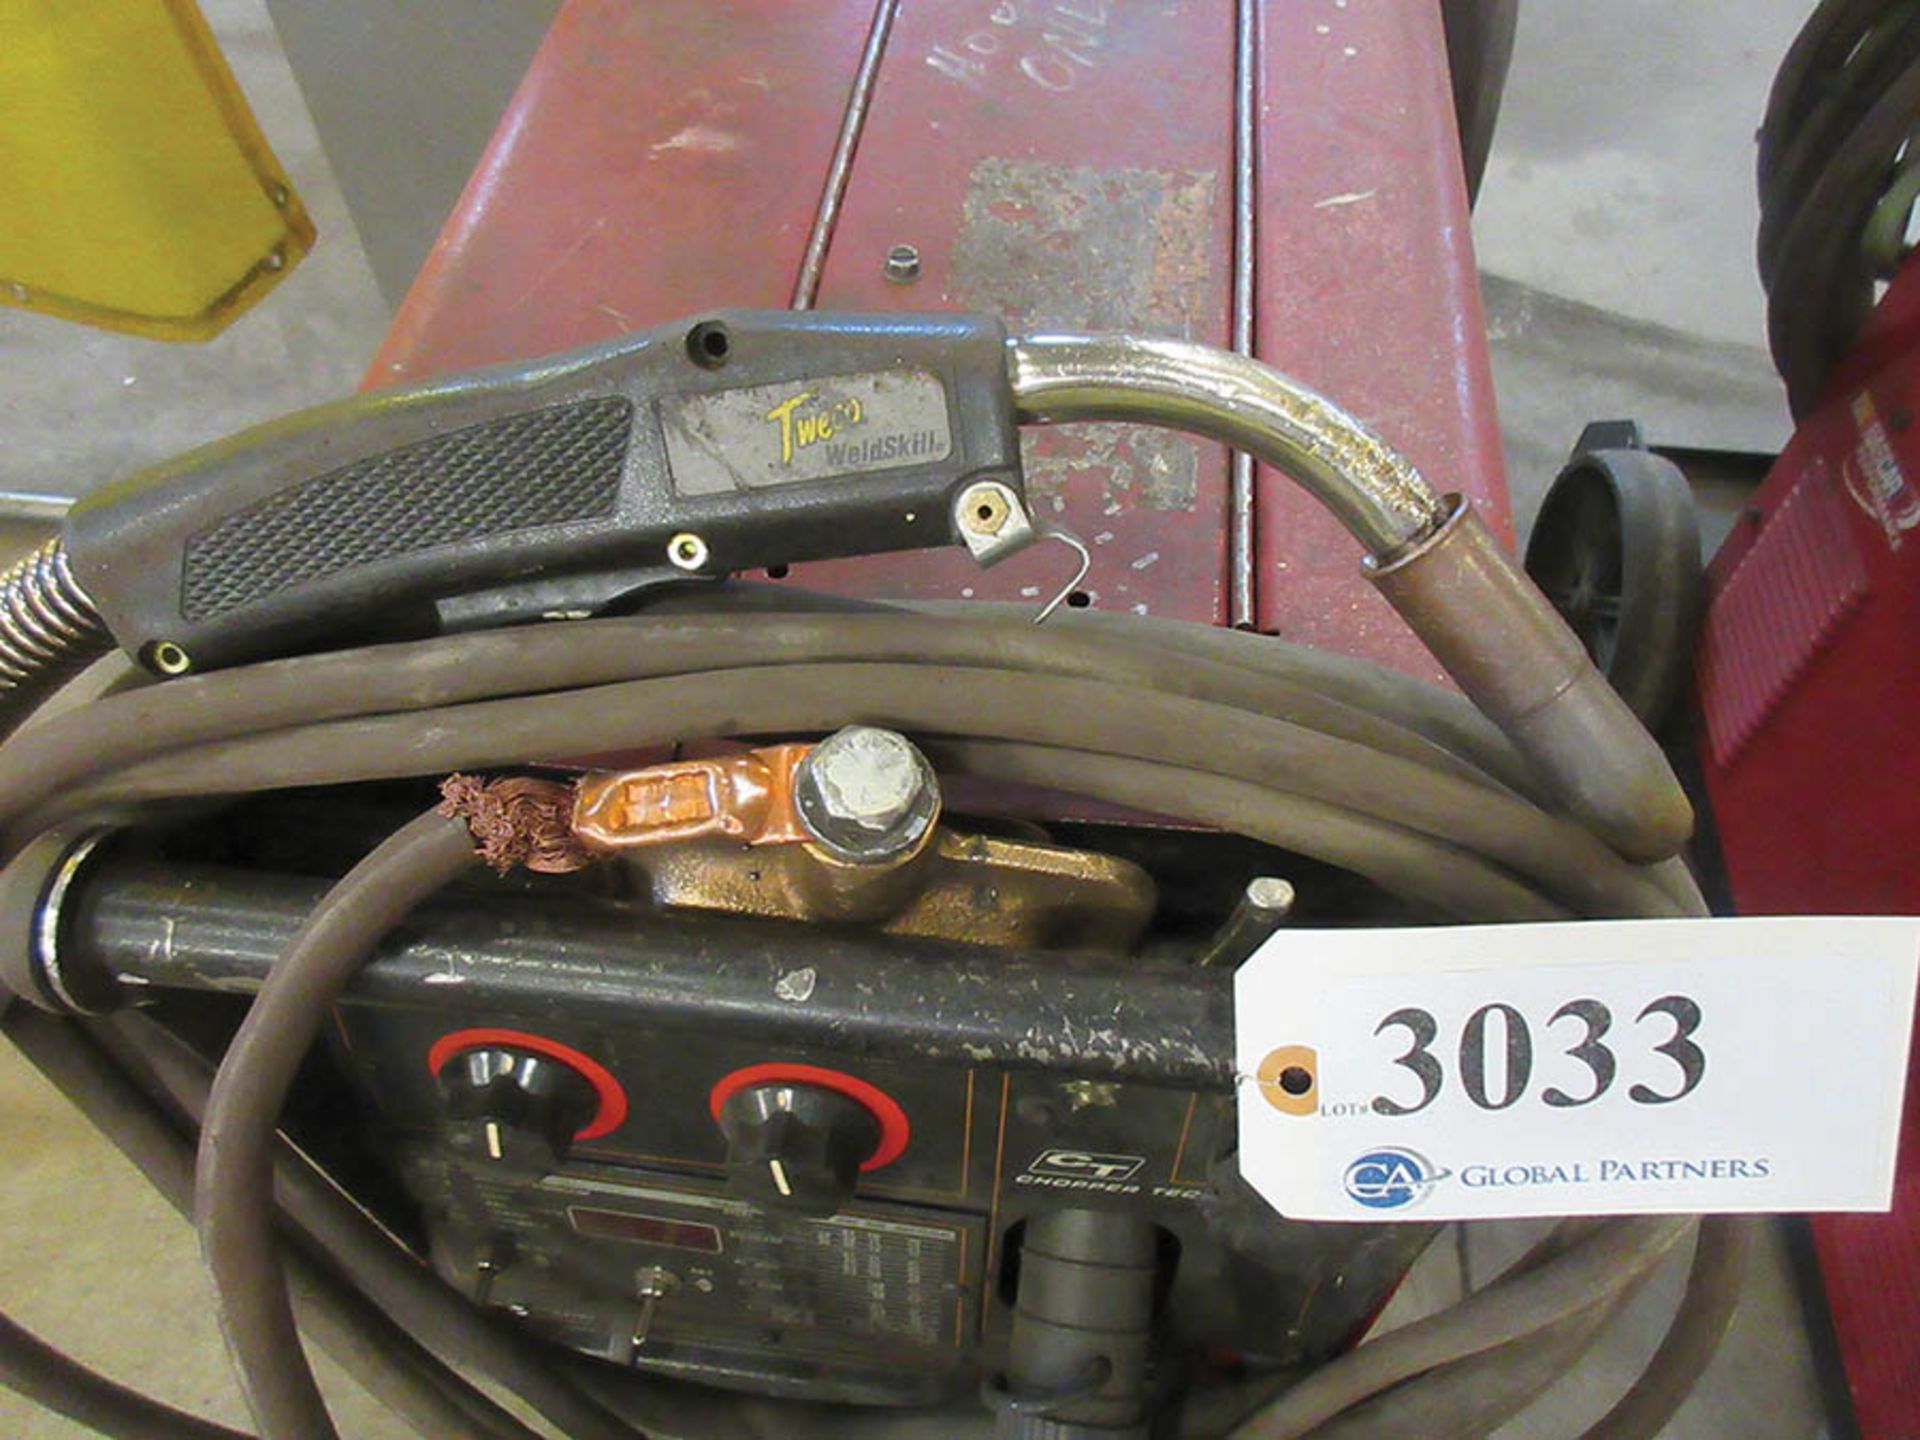 LINCOLN ELECTRIC 350MP POWER MIG WELDER WITH TWECO WELDSKILL MIG GUN, #72 - Image 3 of 3